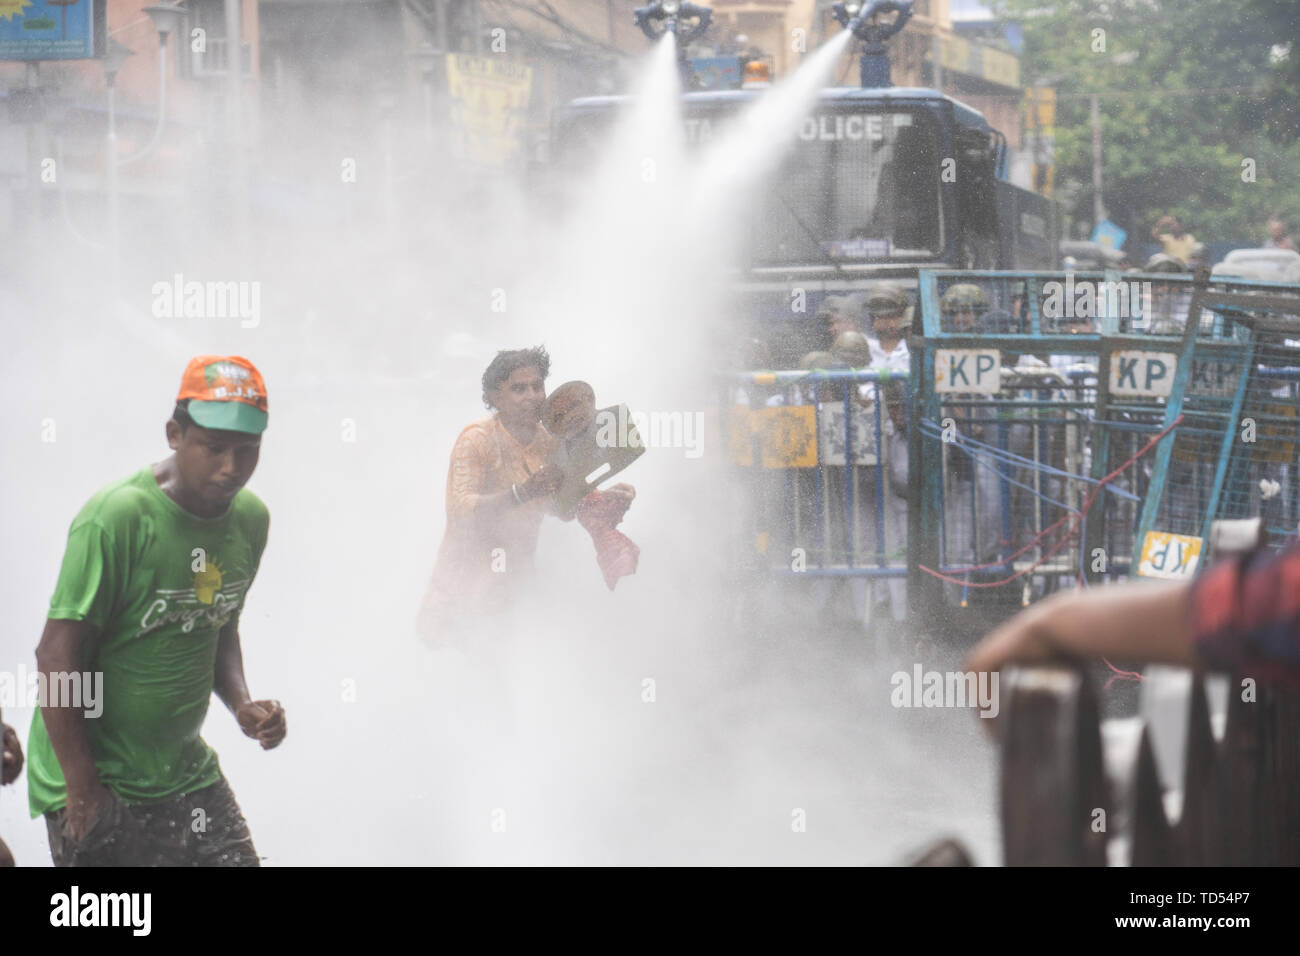 Kolkata, India. 12th June, 2019. Kolkata, India. 12th June, 2019. A Bharatiya Janata Party (BJP) supporter runs back holding a placard of Narendra Modi as police use water cannons during the protest in Kolkata. Bharatiya Janata Party workers protest against the killings of the BJP workers and also highlighting the alleged deterioration of law and order in the state, the Police used water cannons and tear gas shells towards the protesters who held a rally at Kolkata Police headquarters. Credit: SOPA Images Limited/Alamy Live News Stock Photo